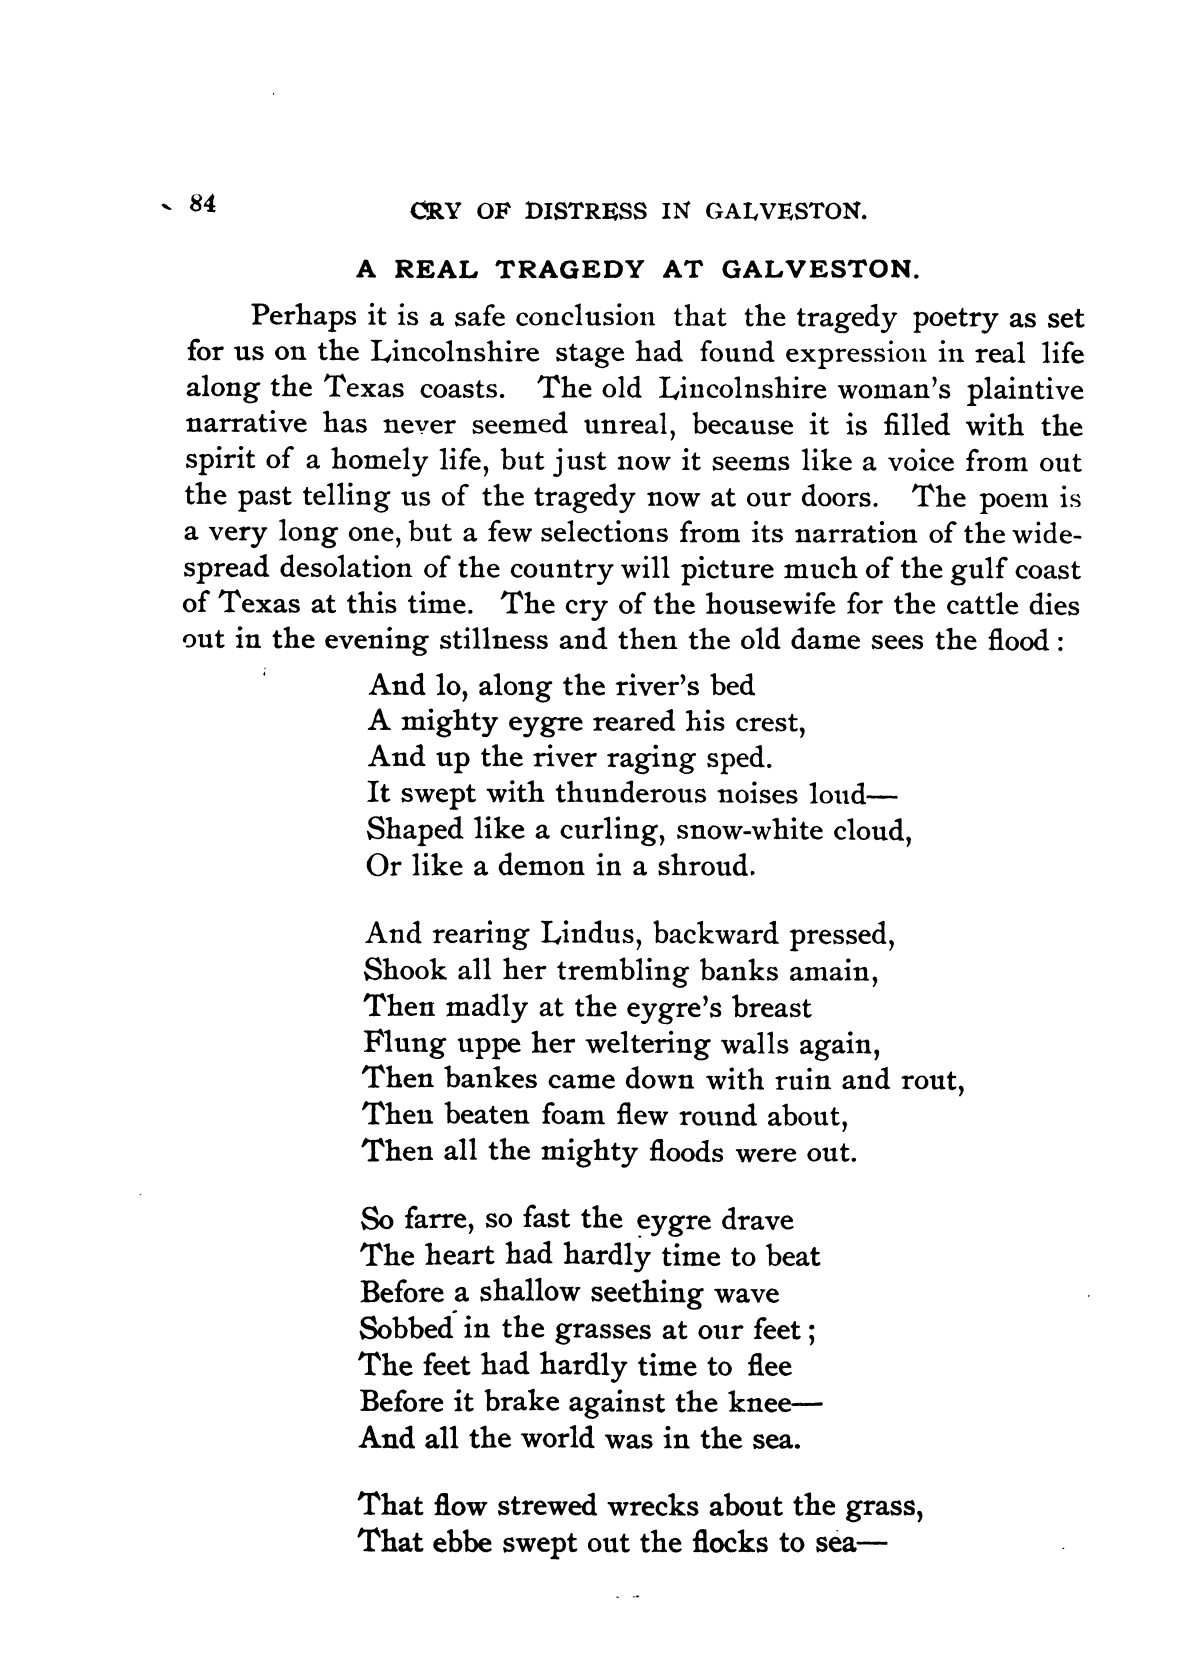 The Great Galveston Disaster, Containing a Full and Thrilling Account of the Most Appalling Calamity of Modern Times
                                                
                                                    84
                                                